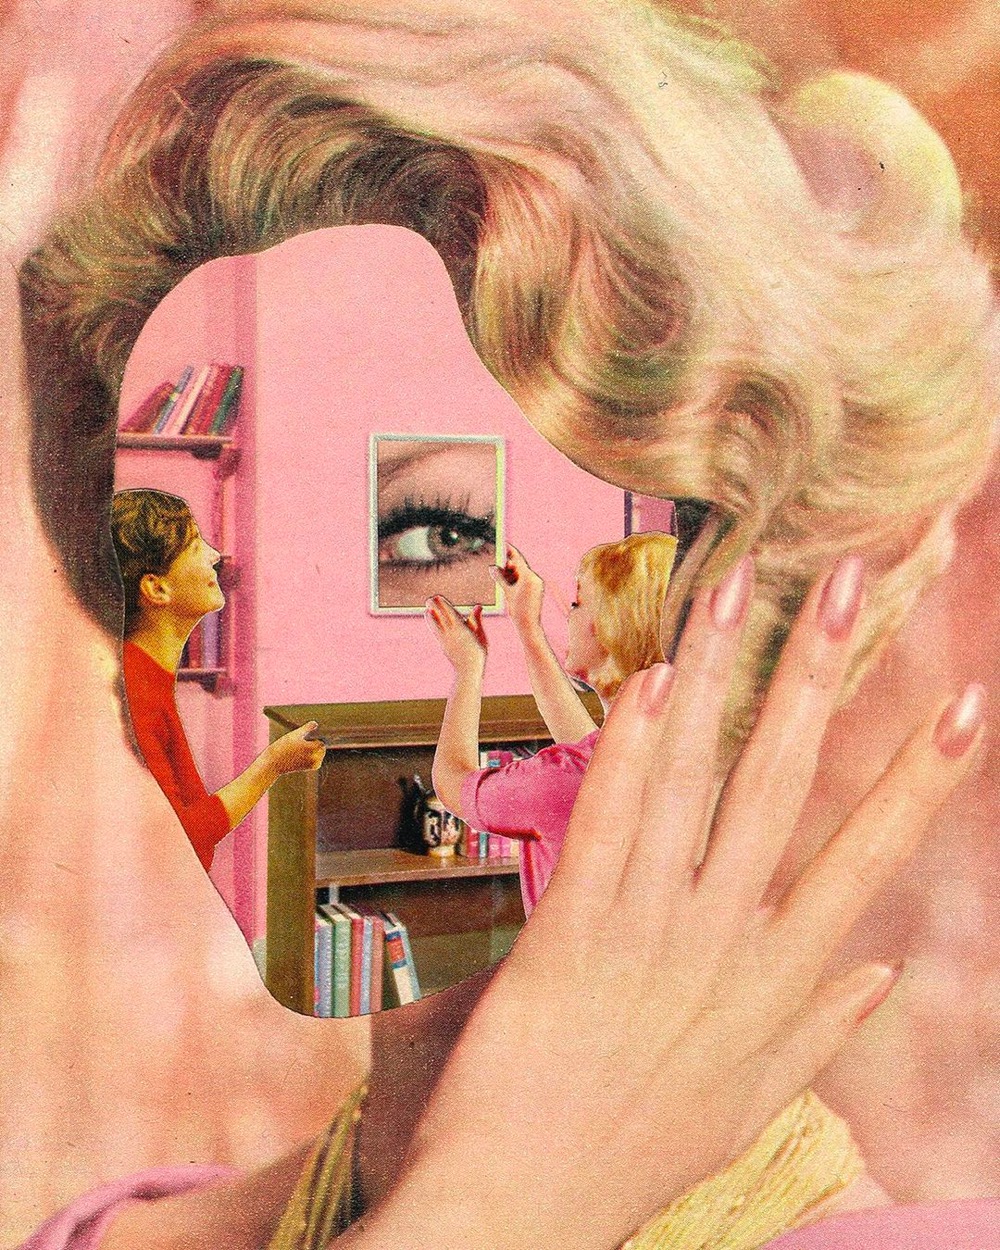 hand-cut collages with a face replaced with various other scenes/objects